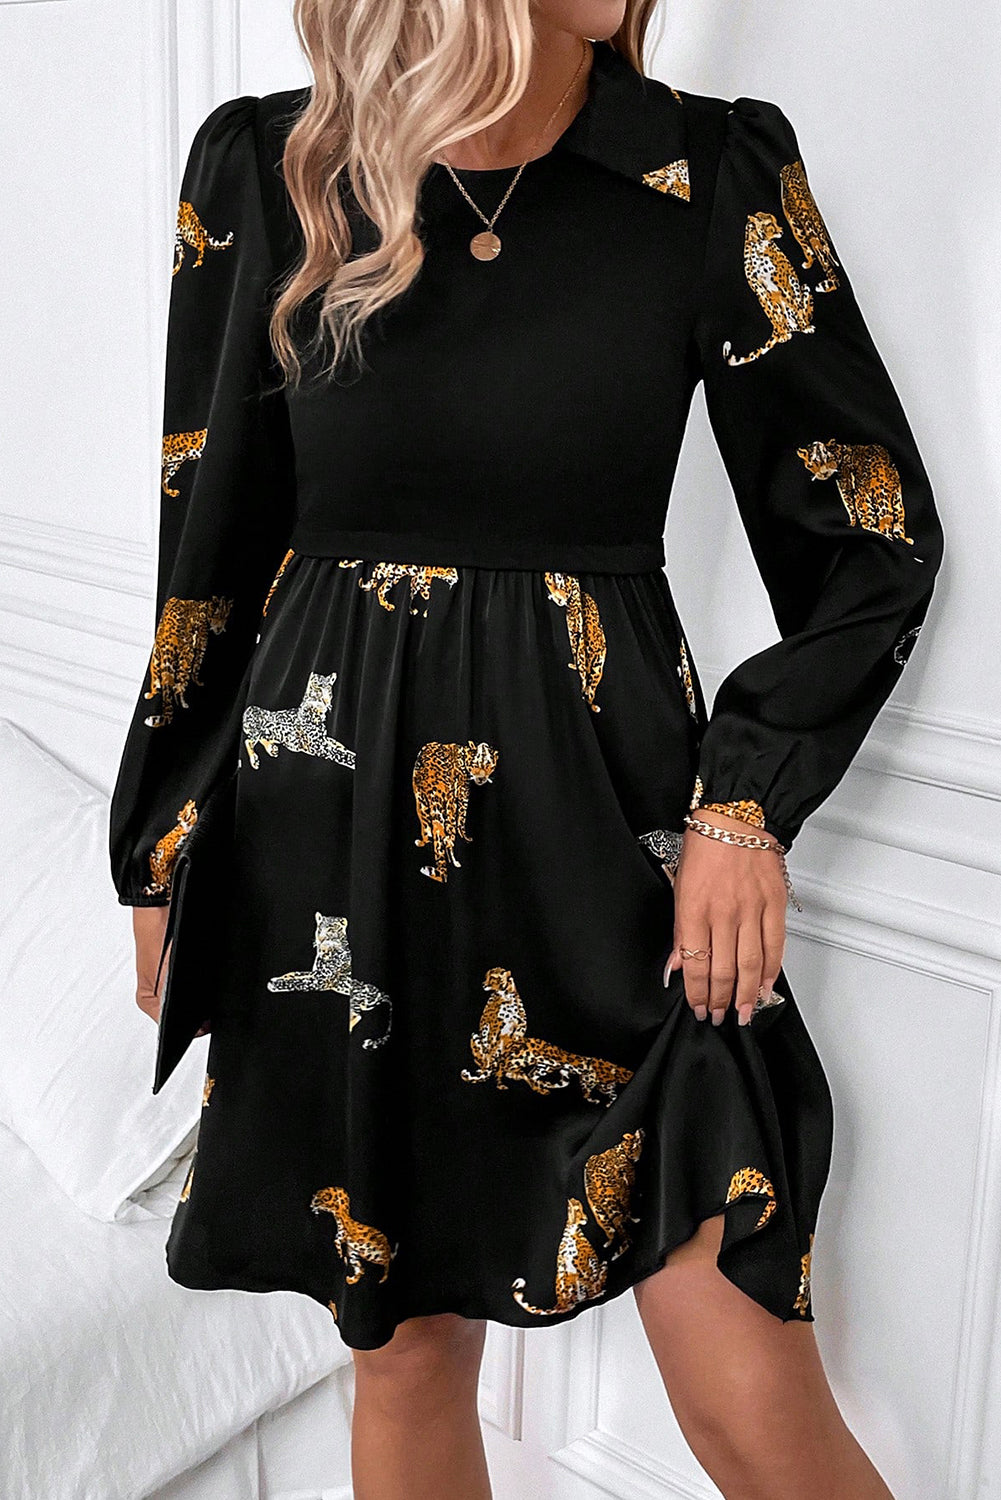 Black and leopard print long sleeves dress